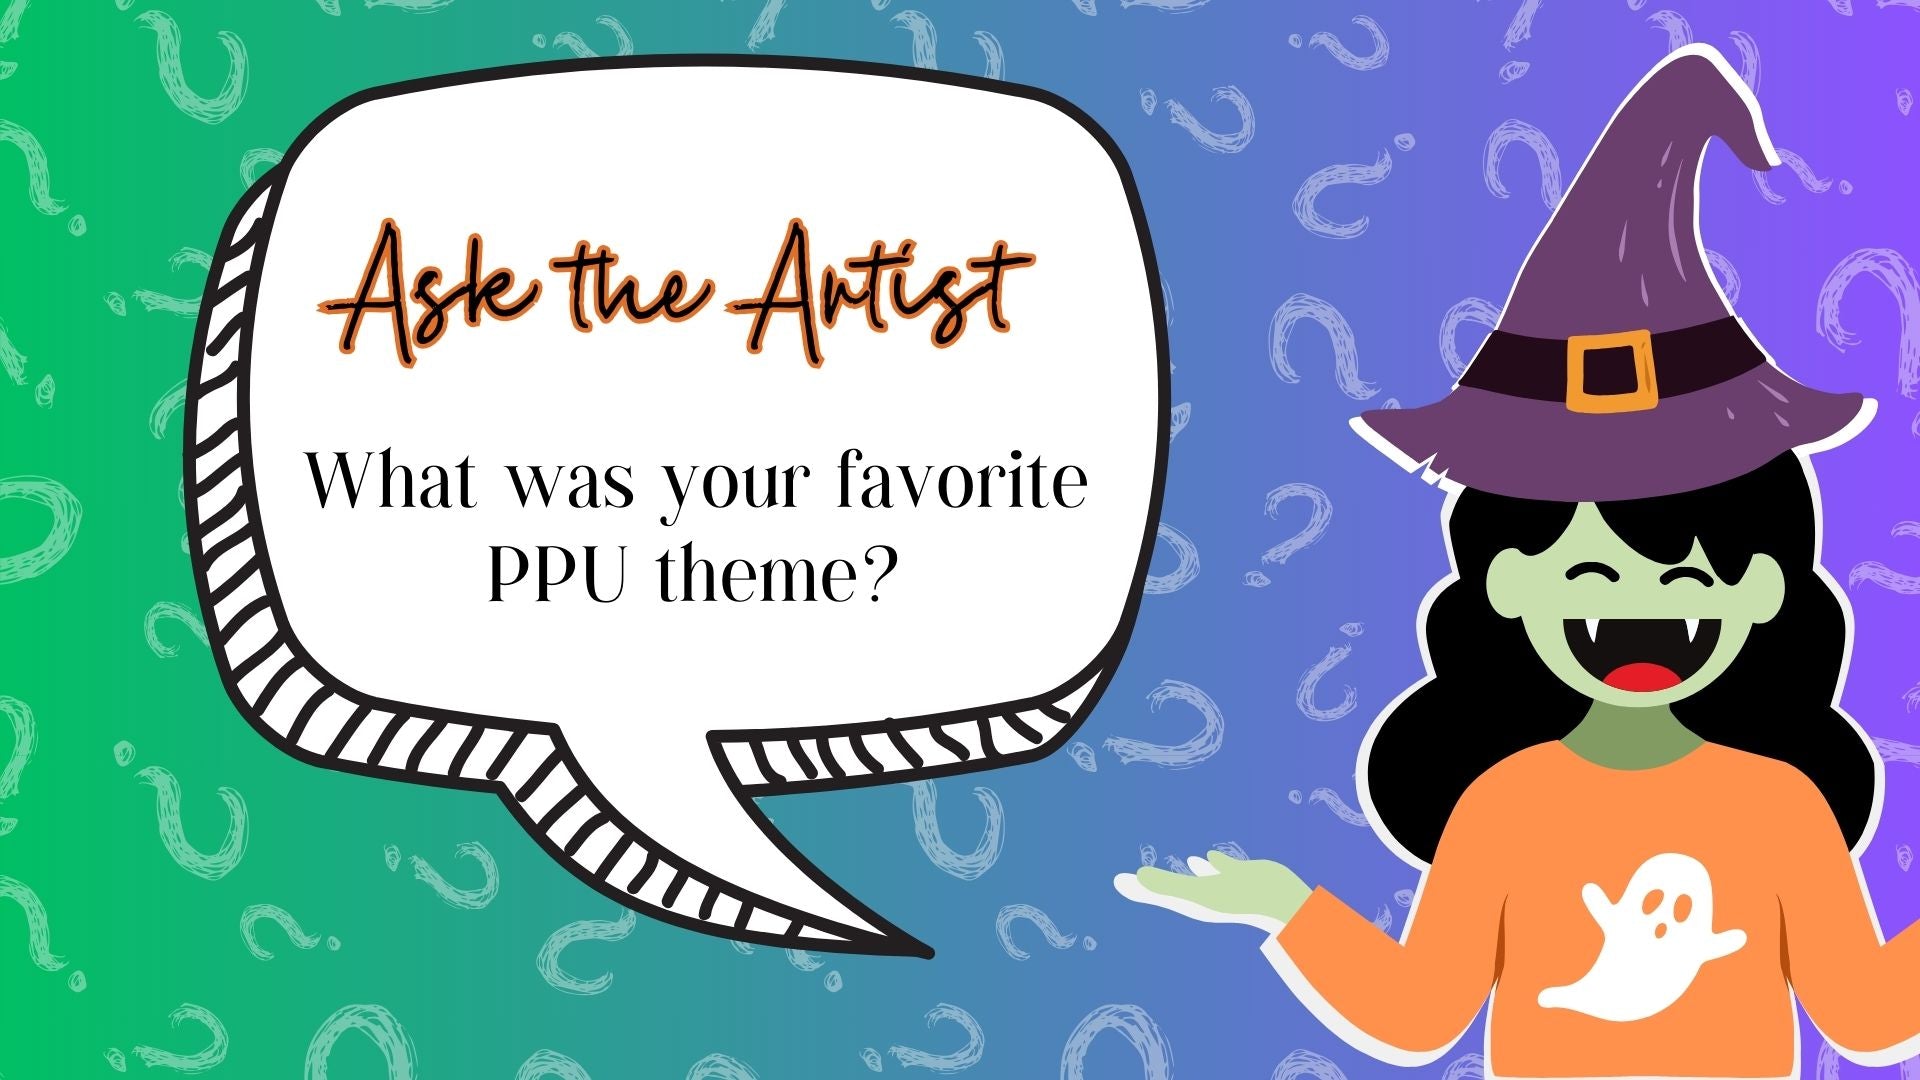 Ask the Artist: Favorite Themes